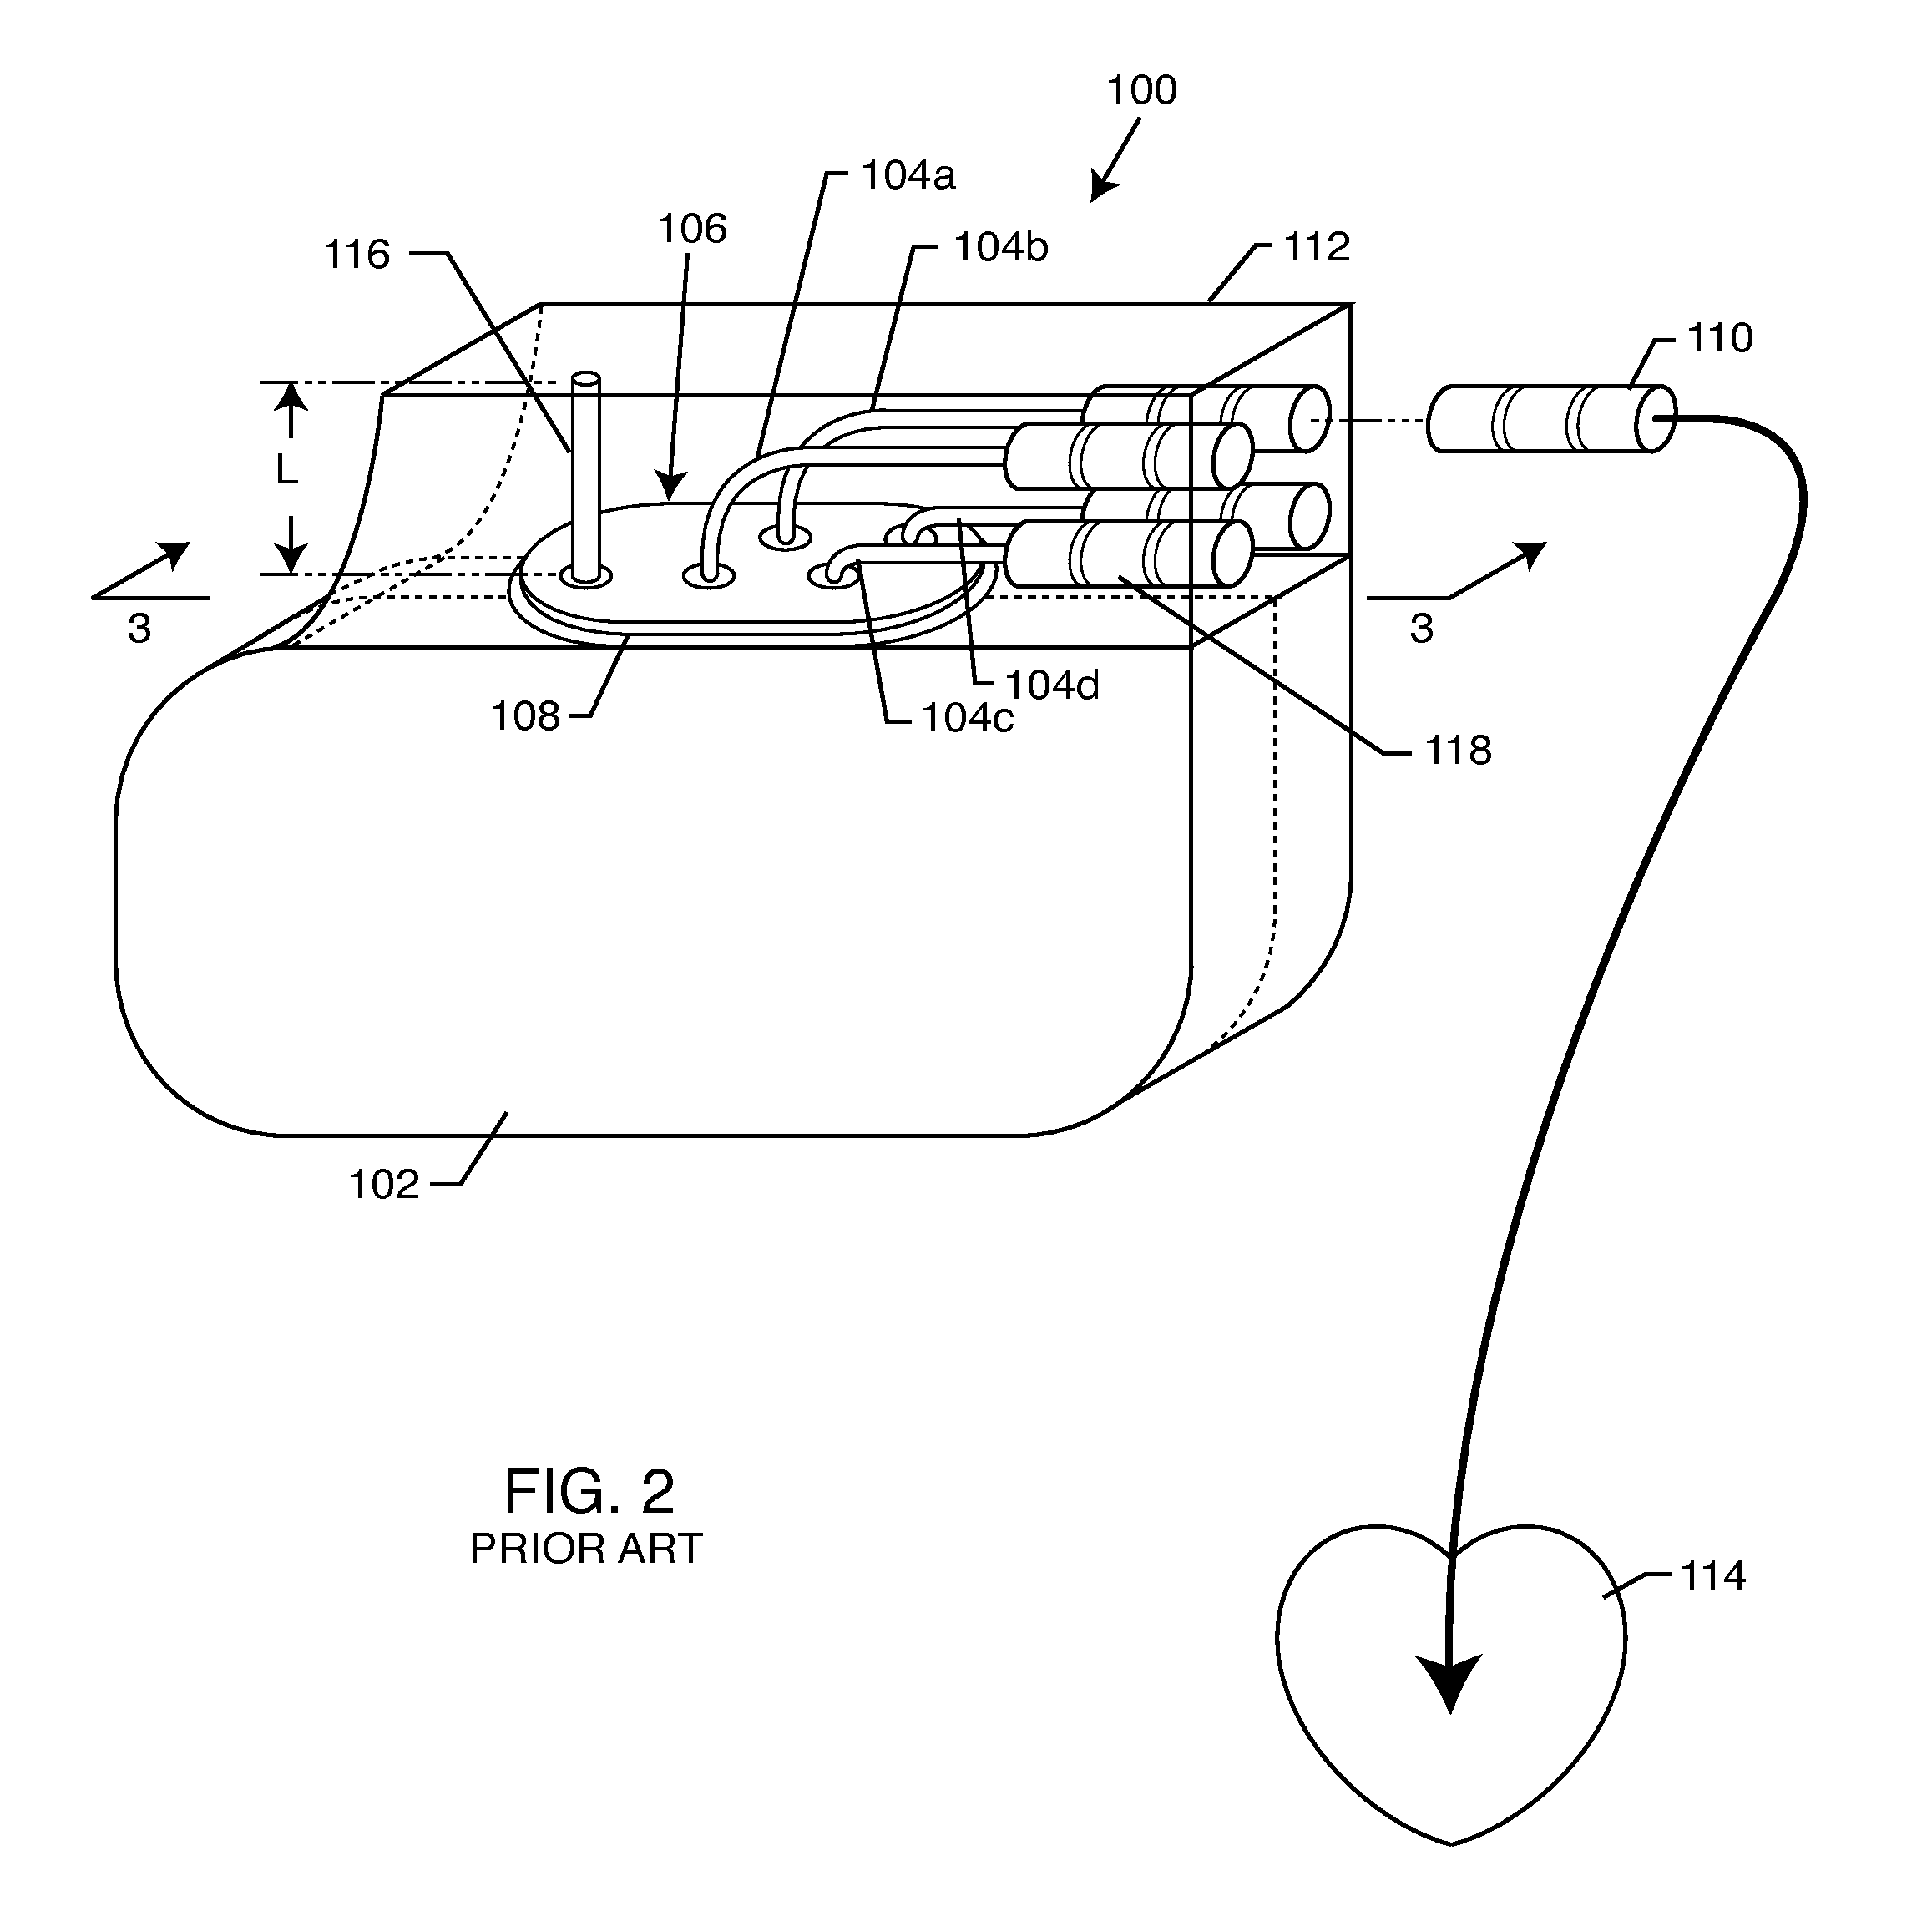 Self-resonant inductor wound portion of an implantable lead for enhanced MRI compatibility of active implantable medical devices